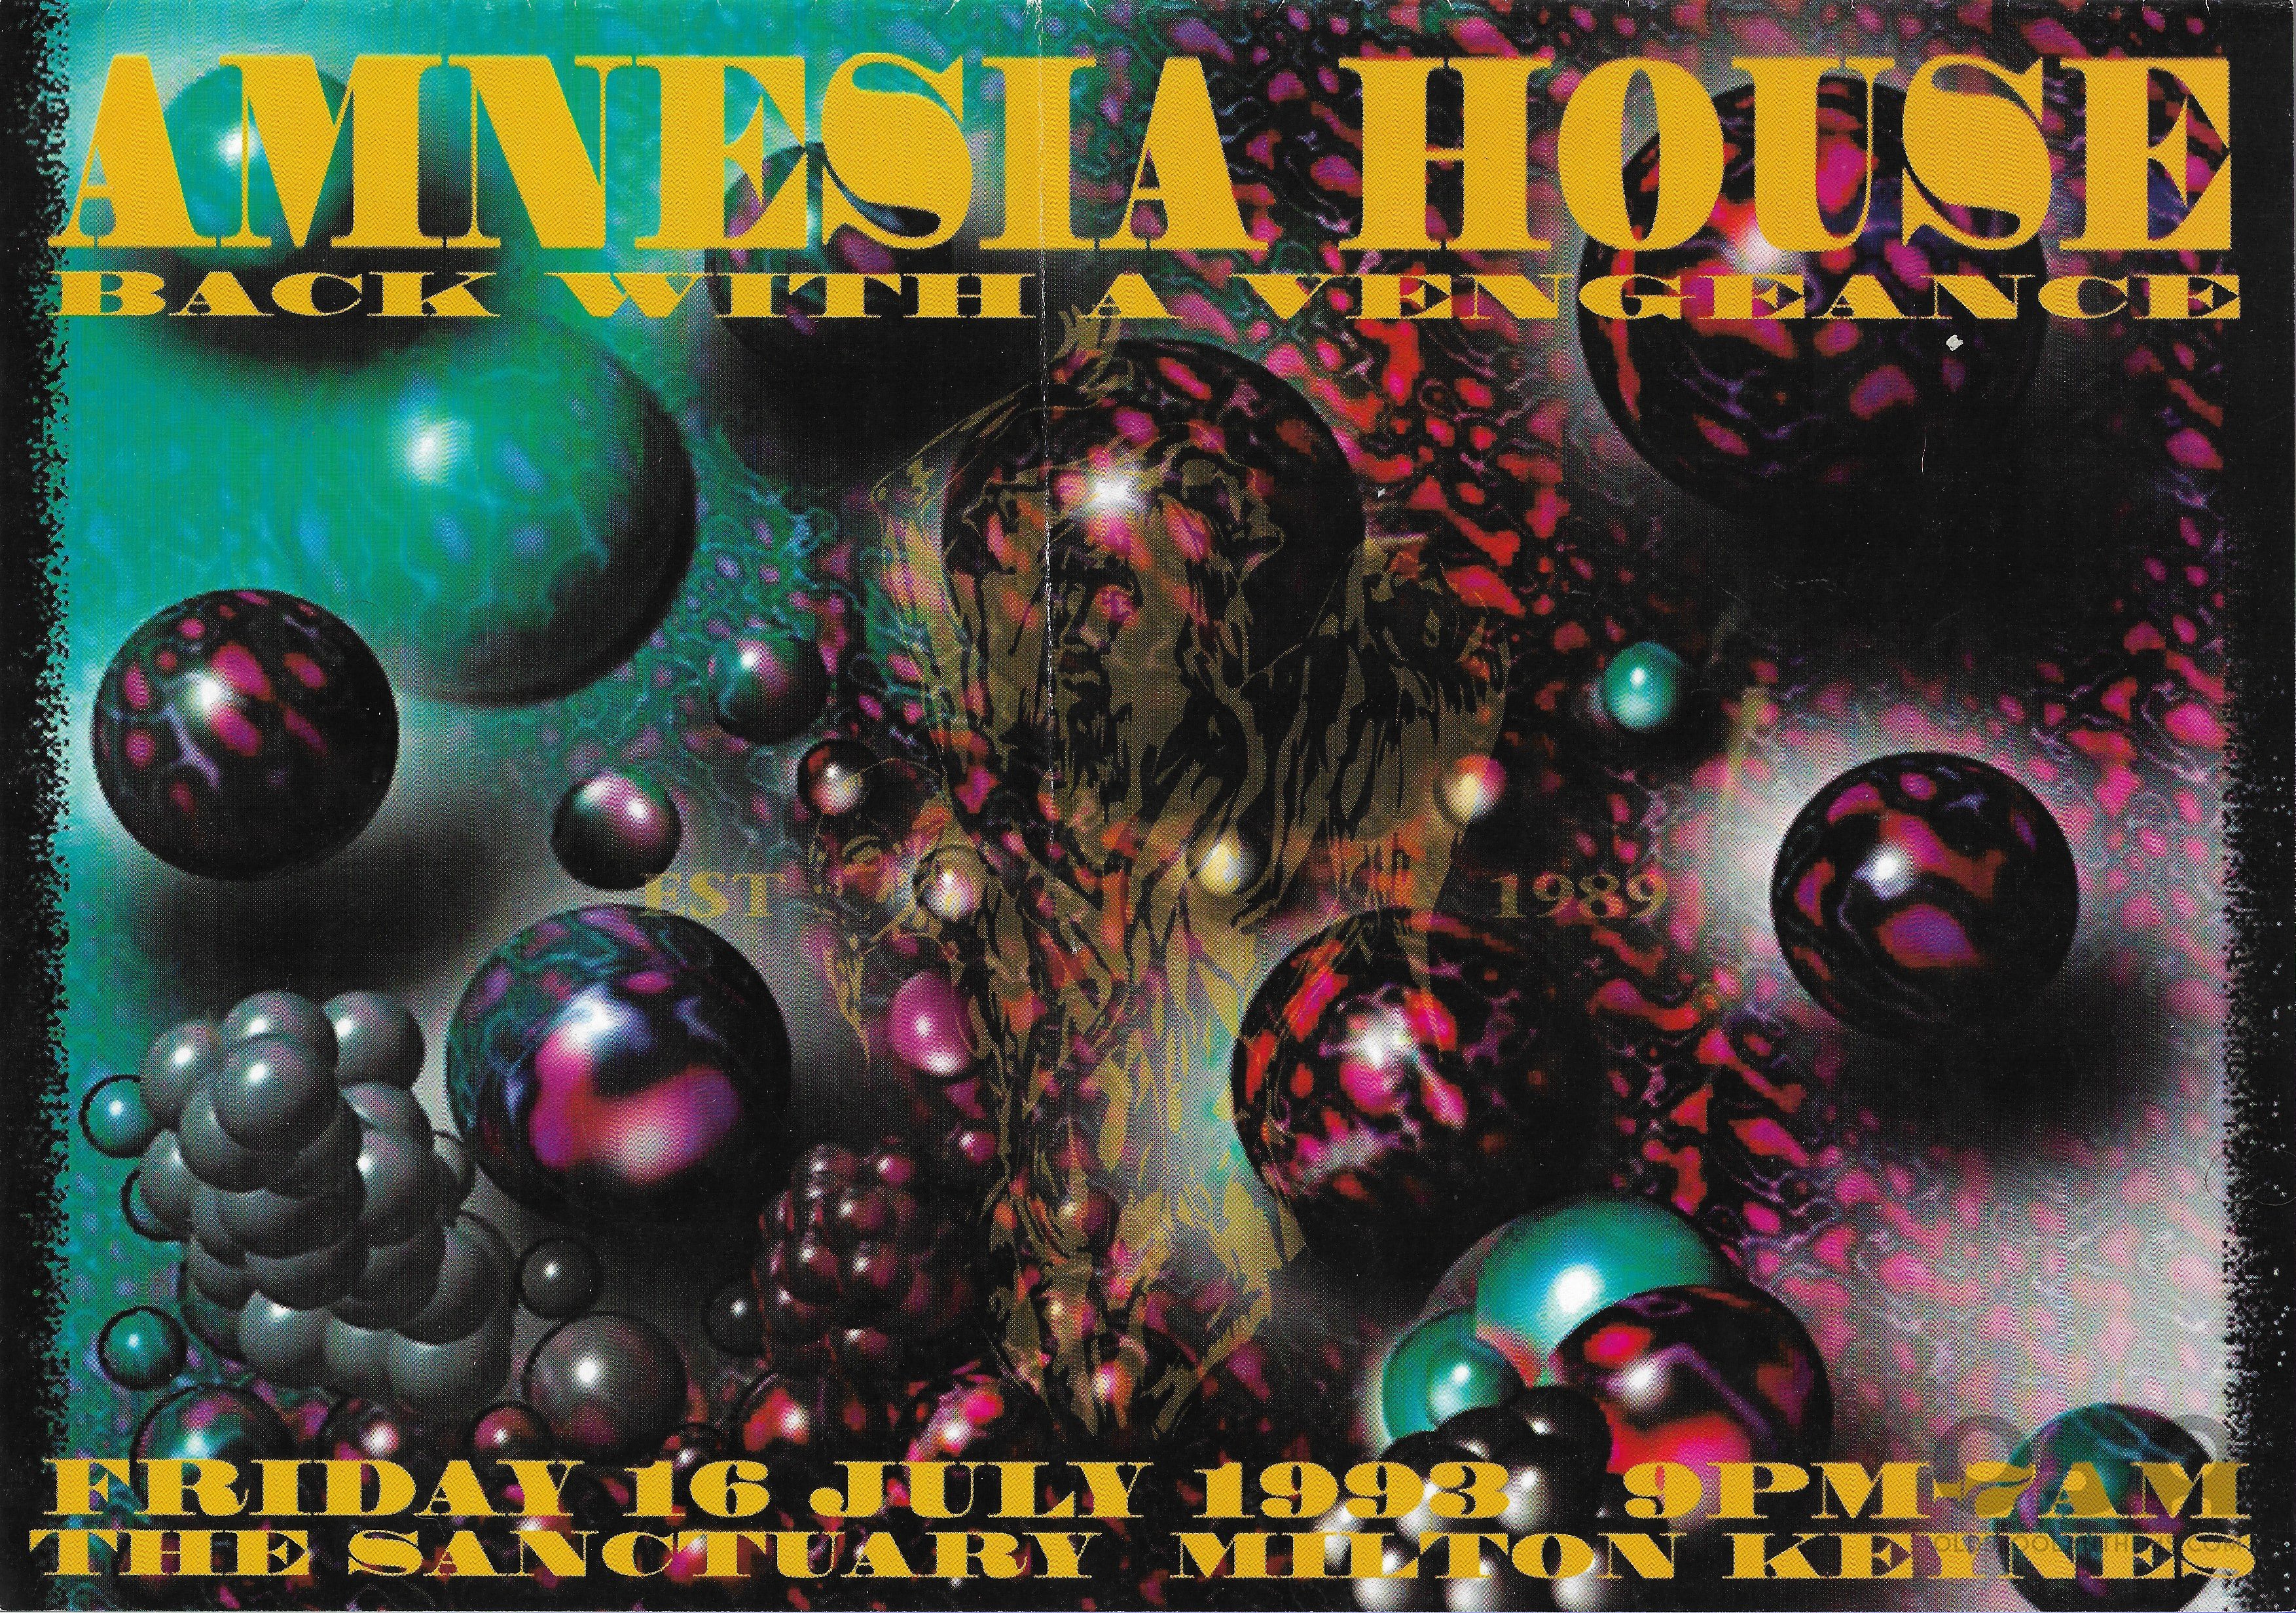 Amnesia House - Back With A Vengeance @ The Sancturay - Milton Keynes 16th July 1993 - Front .jpg